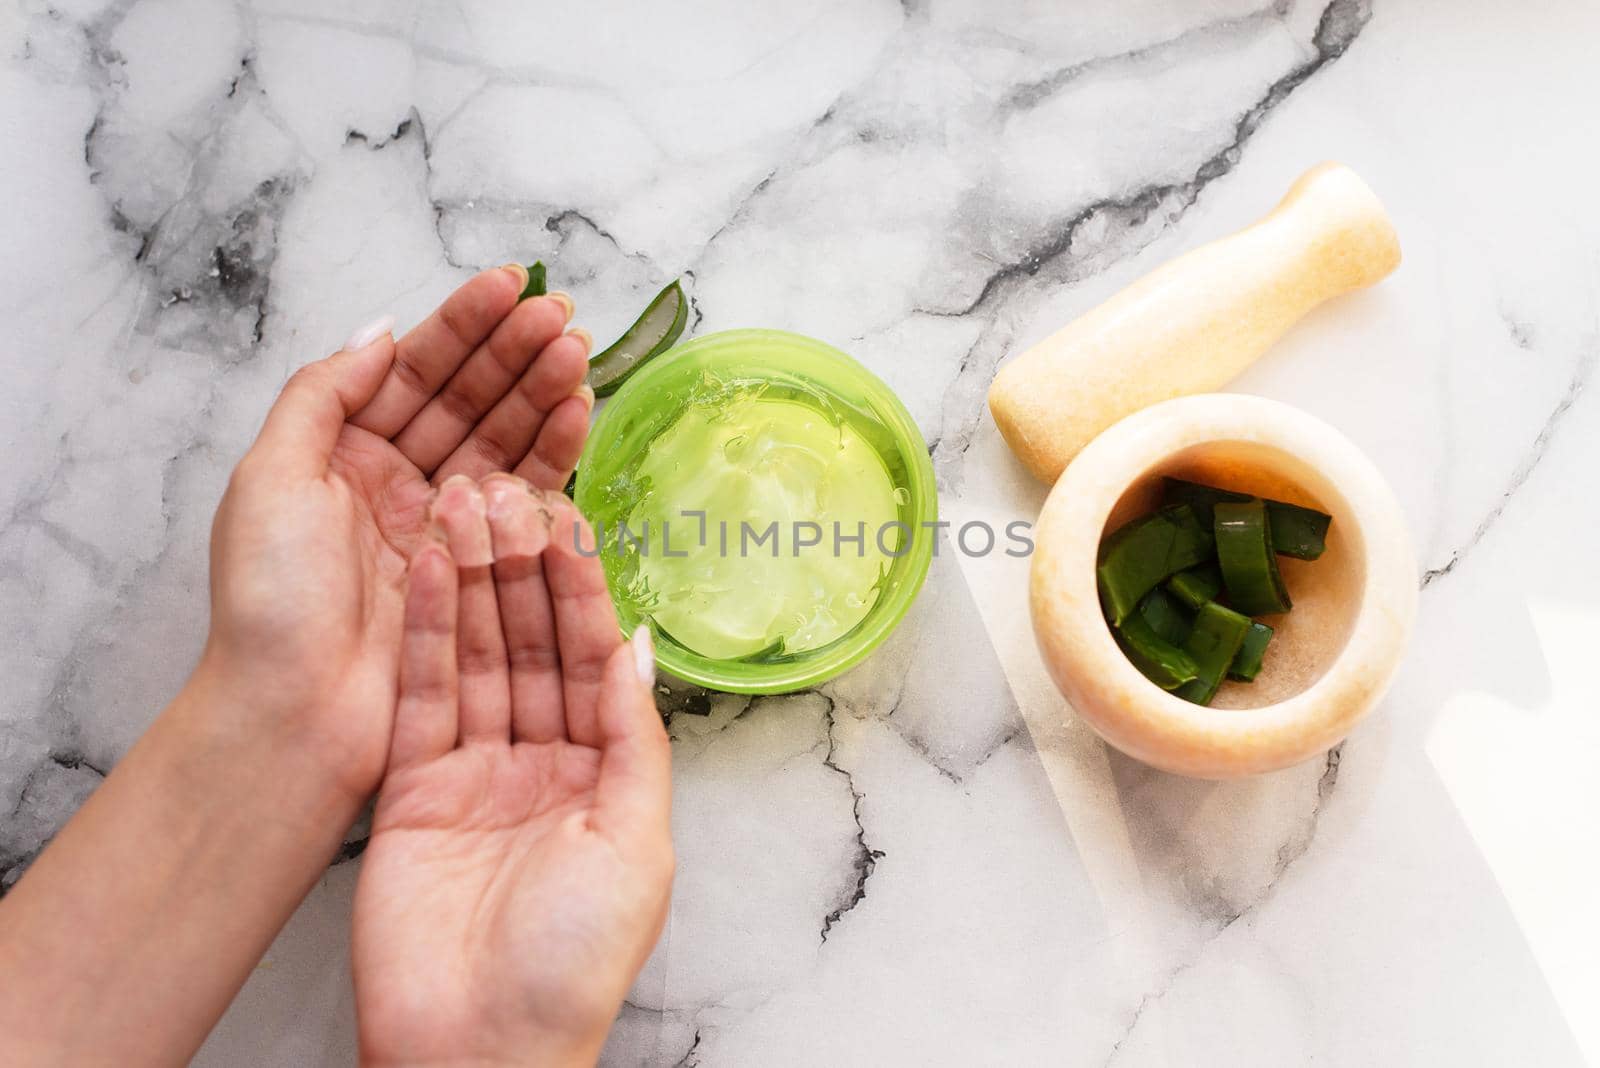 Hands of woman holding aloe gel next to mortar and chopped aloe leaf.